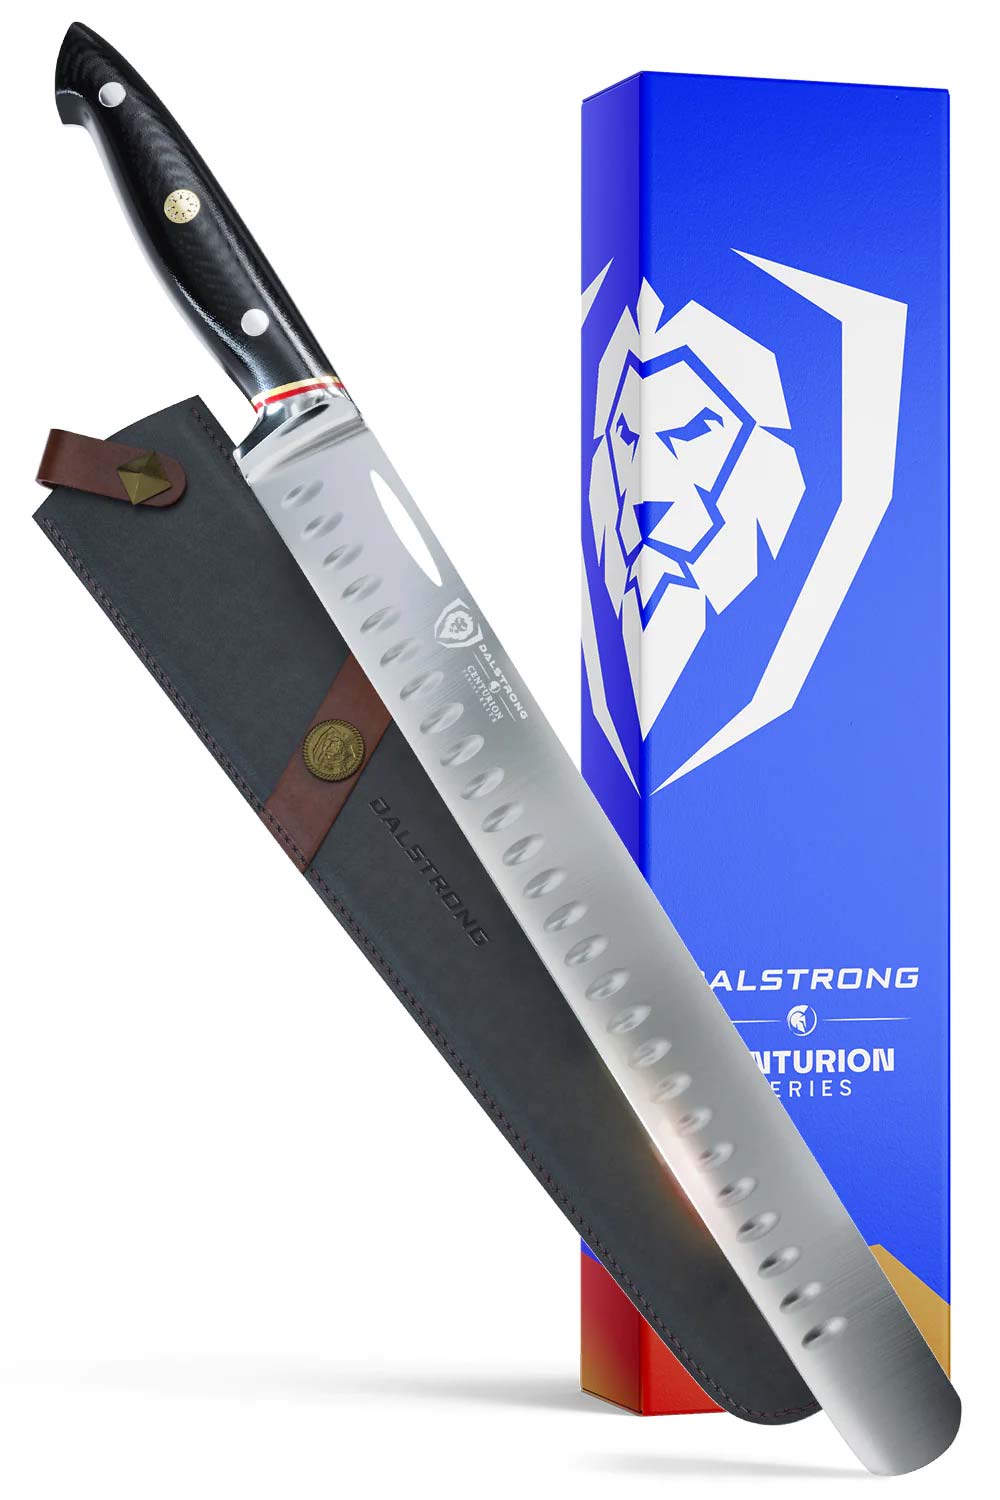 Dalstrong centurion series 12 inch slicing and carving knife in front of it's premium packaging.